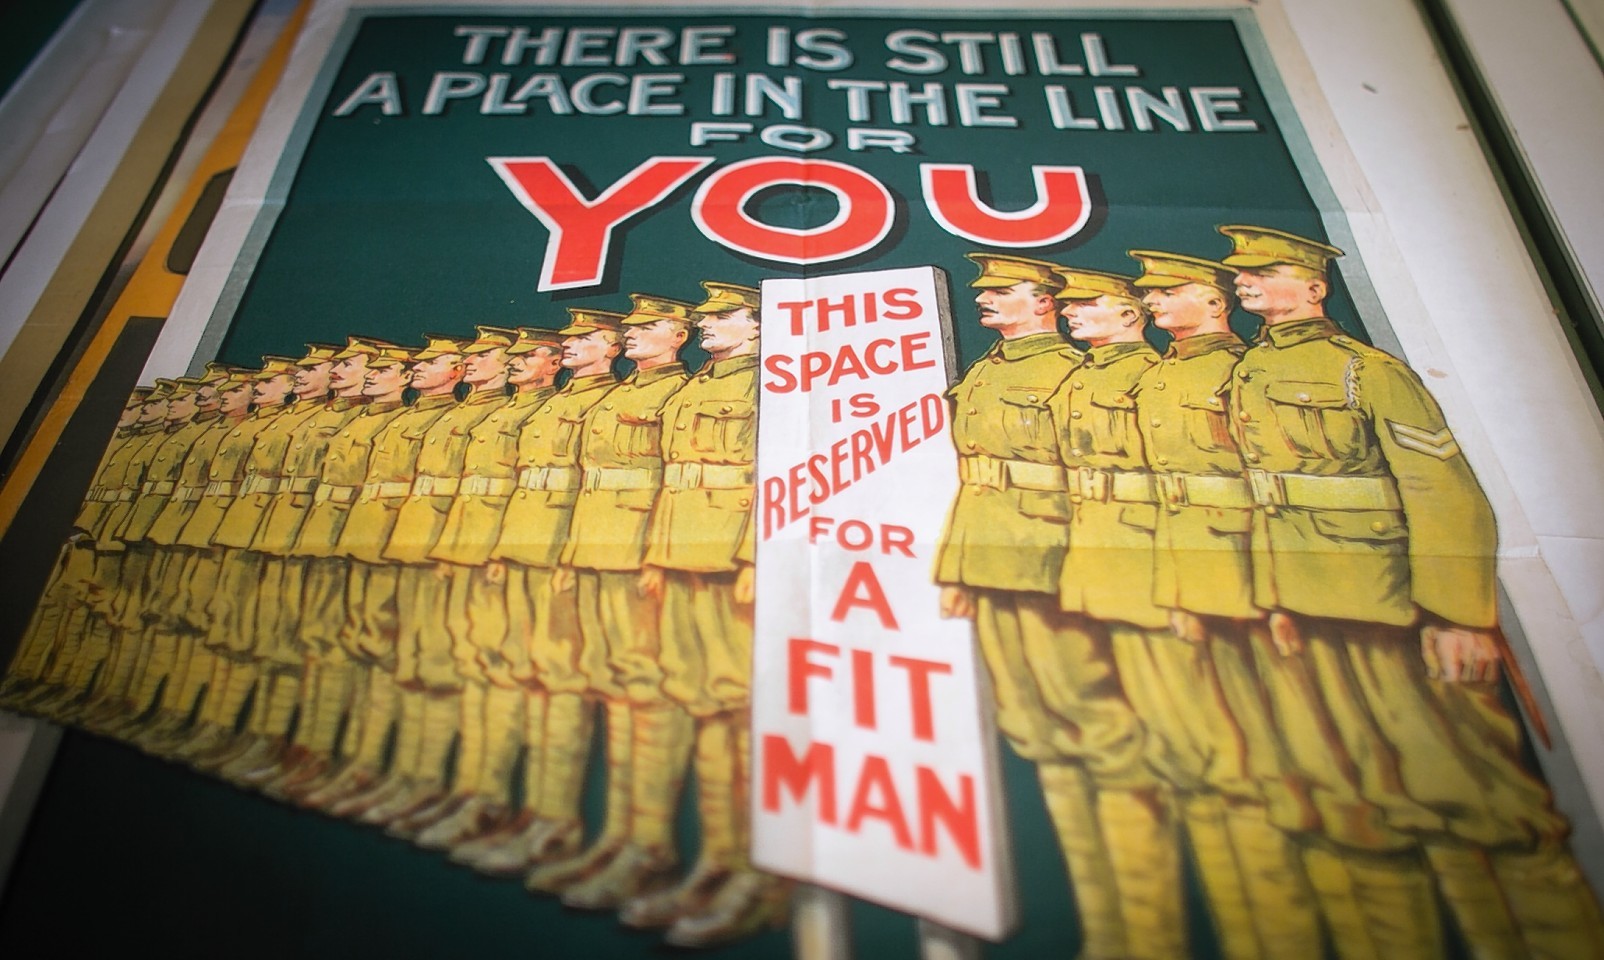 A collection of British Army recruitment posters from the First World War